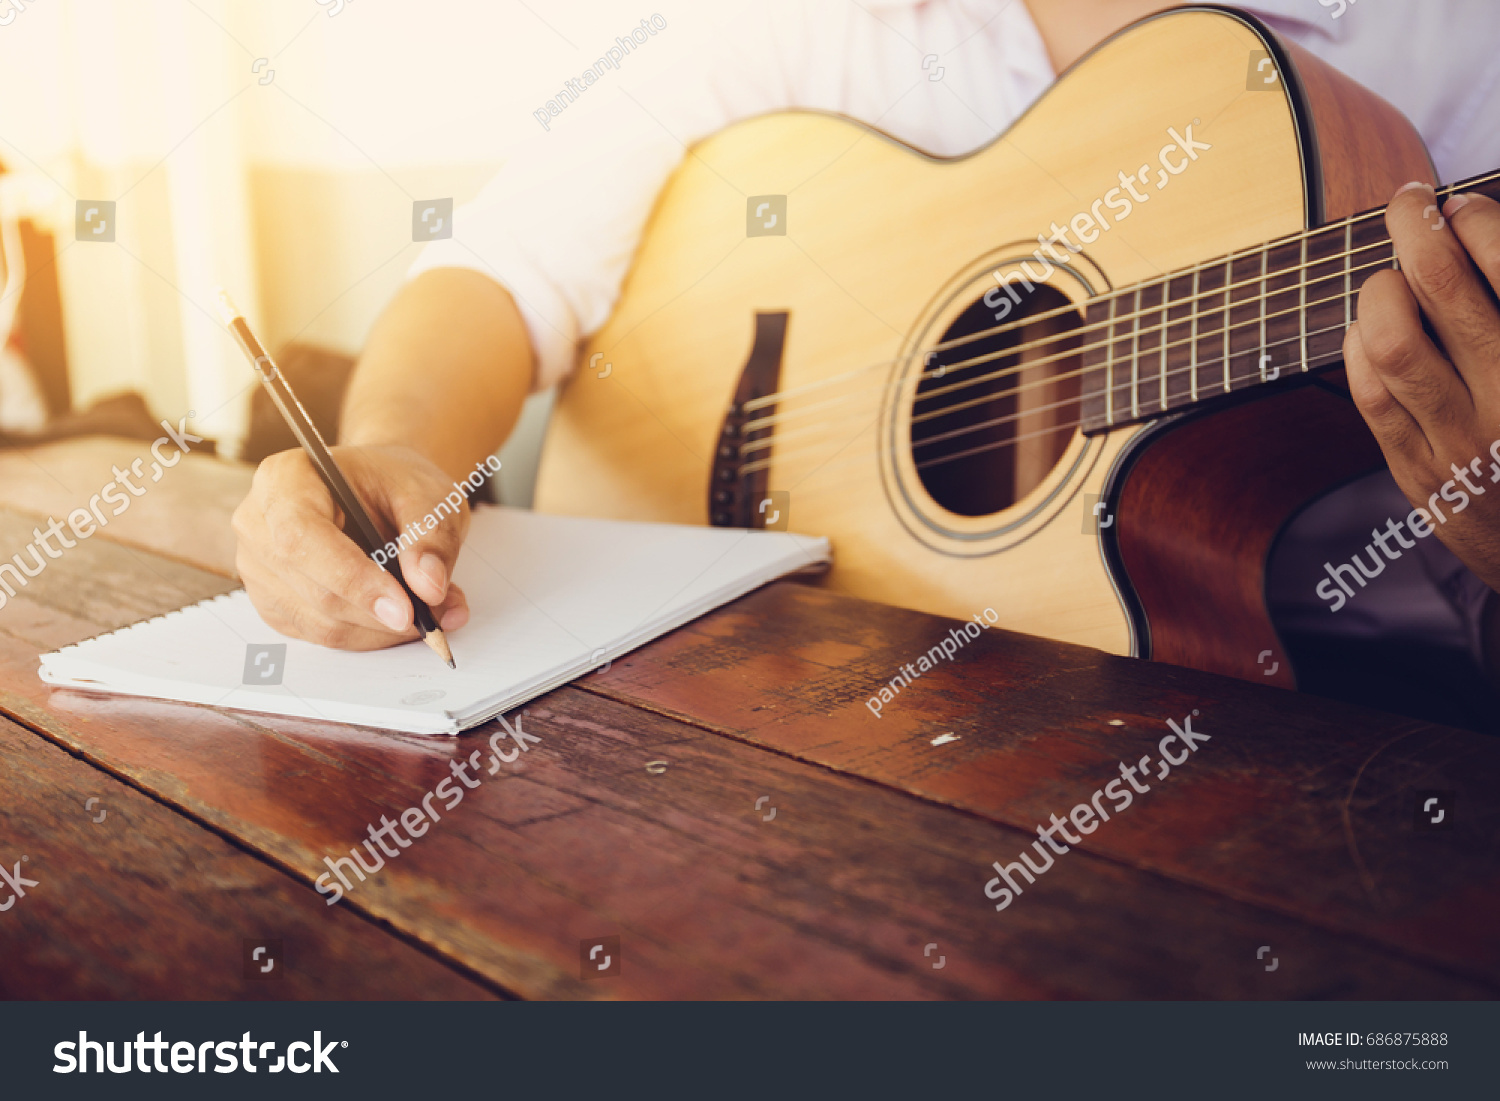 soft and blur focus.song writer holding pencil compose a song.musician playing acoustic guitar.empty space for text.concept for live music festival.Instrument on stage,abstract musical background. #686875888